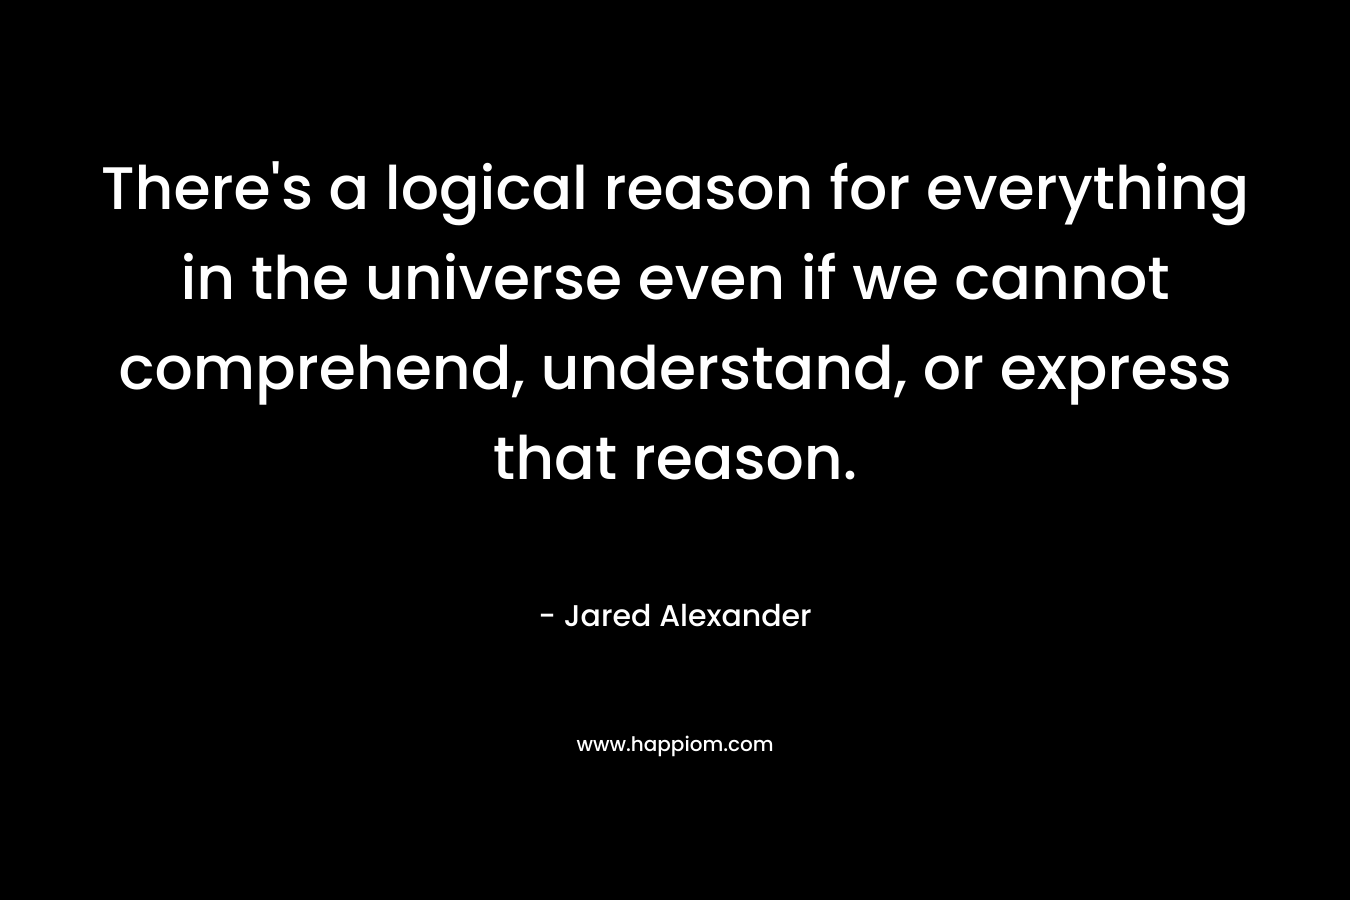 There’s a logical reason for everything in the universe even if we cannot comprehend, understand, or express that reason. – Jared Alexander